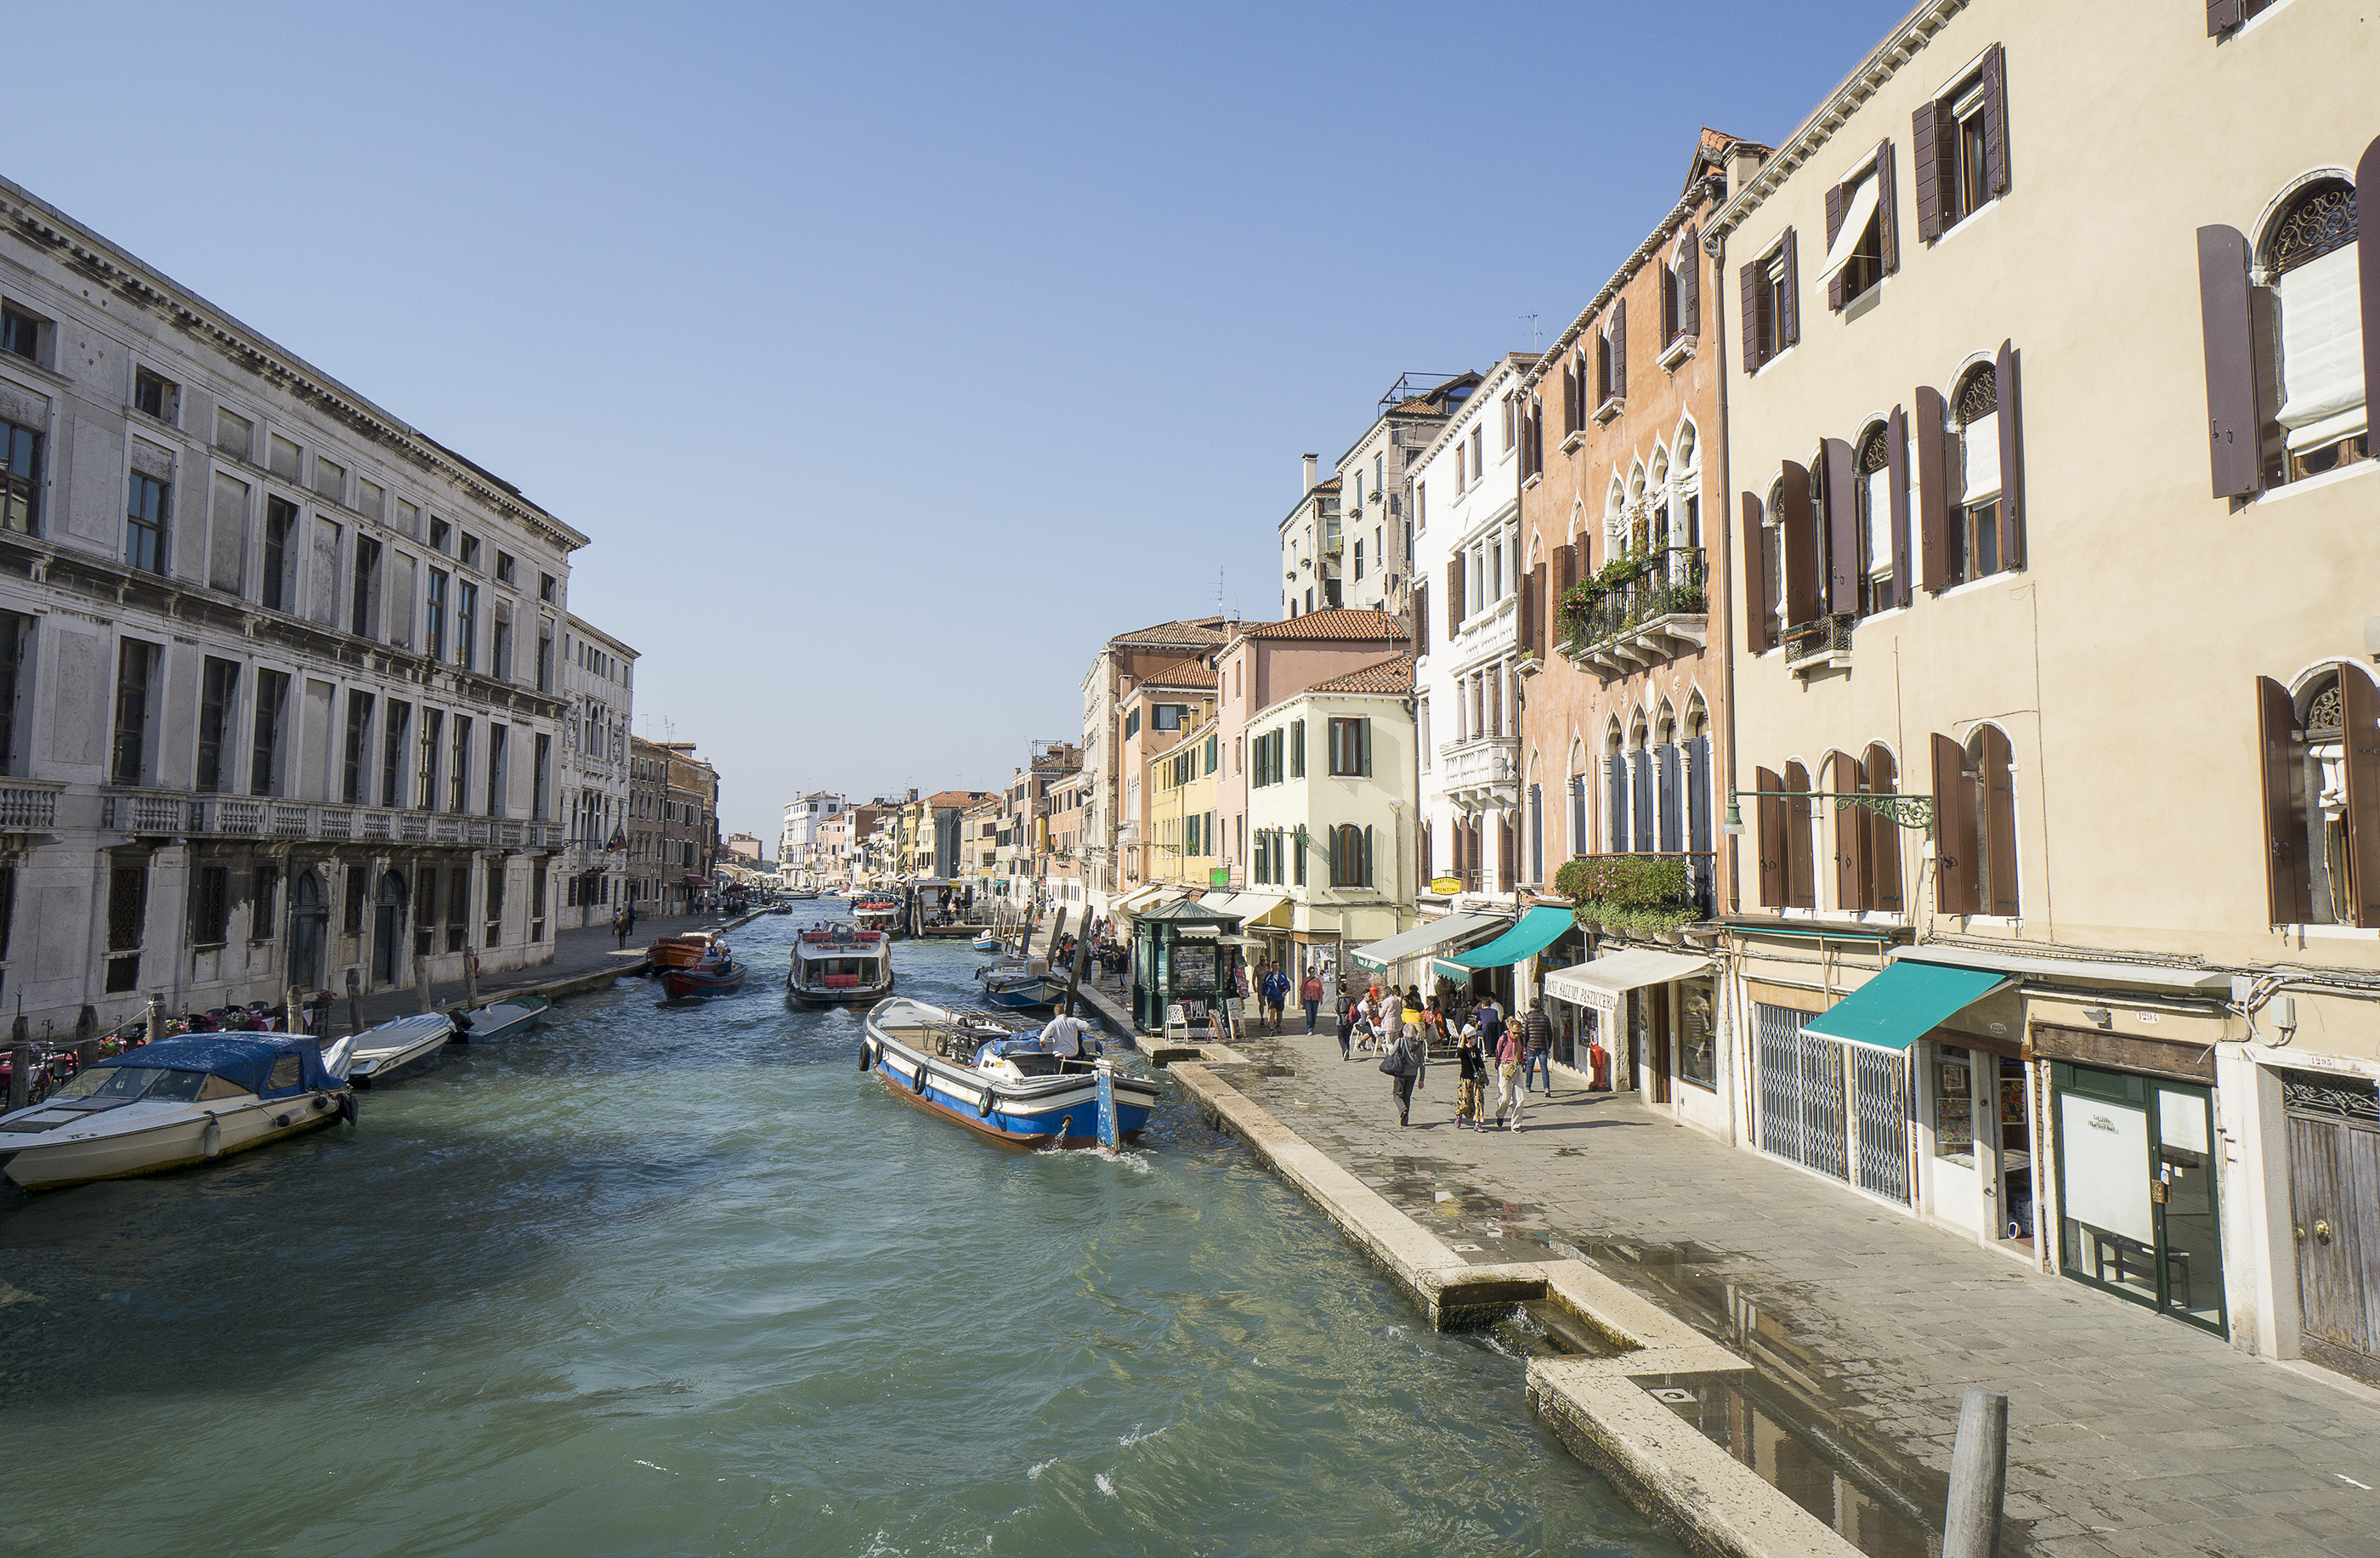 Staying in Venice for one night